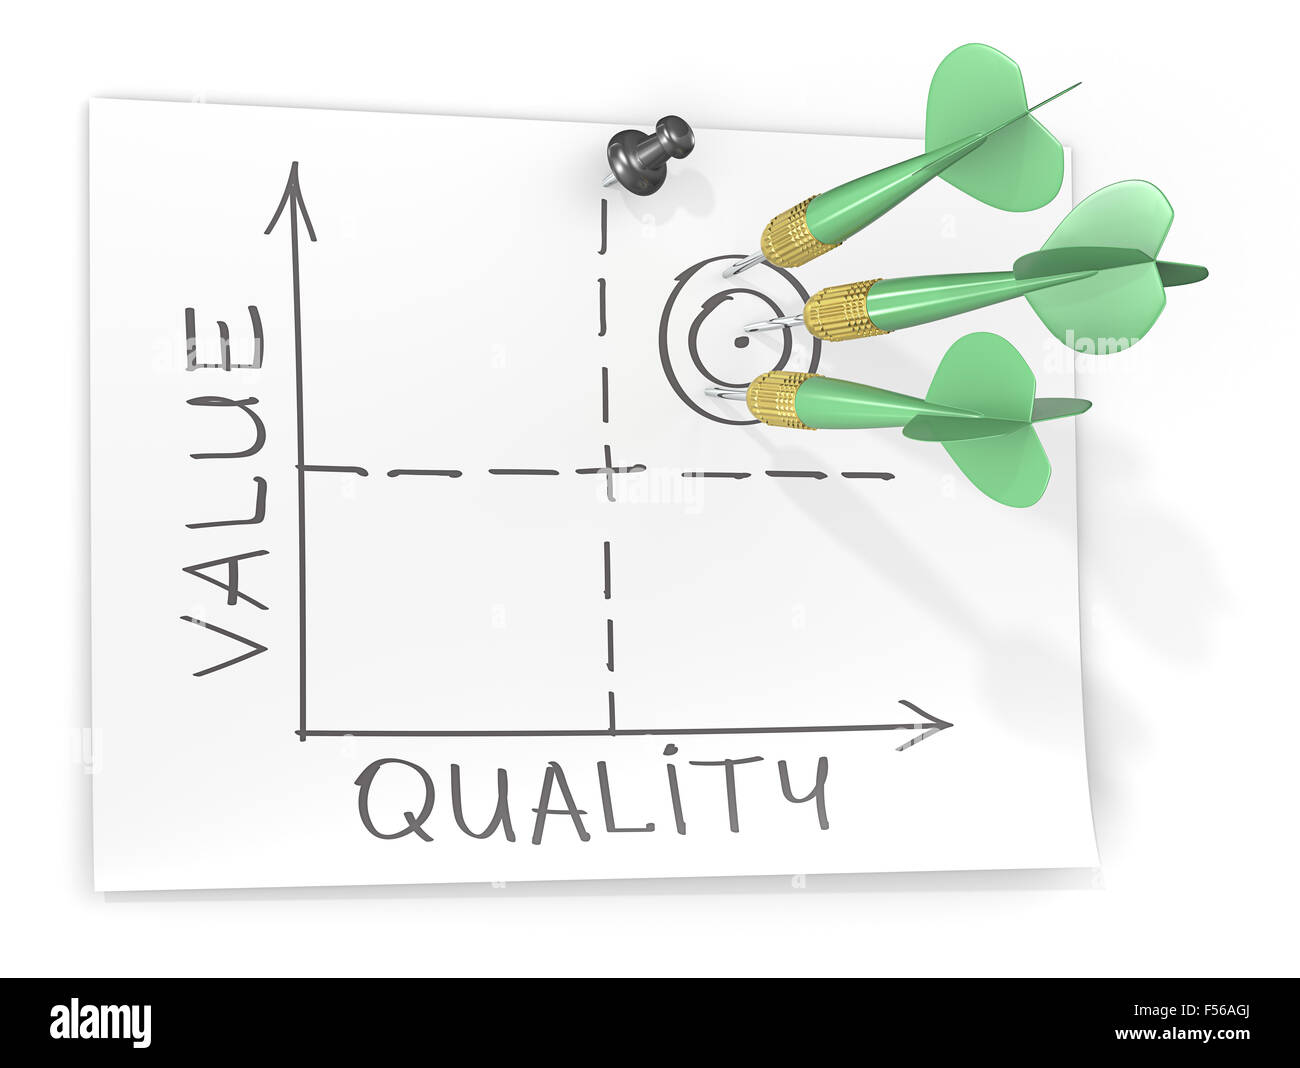 Classic sketch graph of relation between Quality and Value. 3 Green dart arrows. Stock Photo